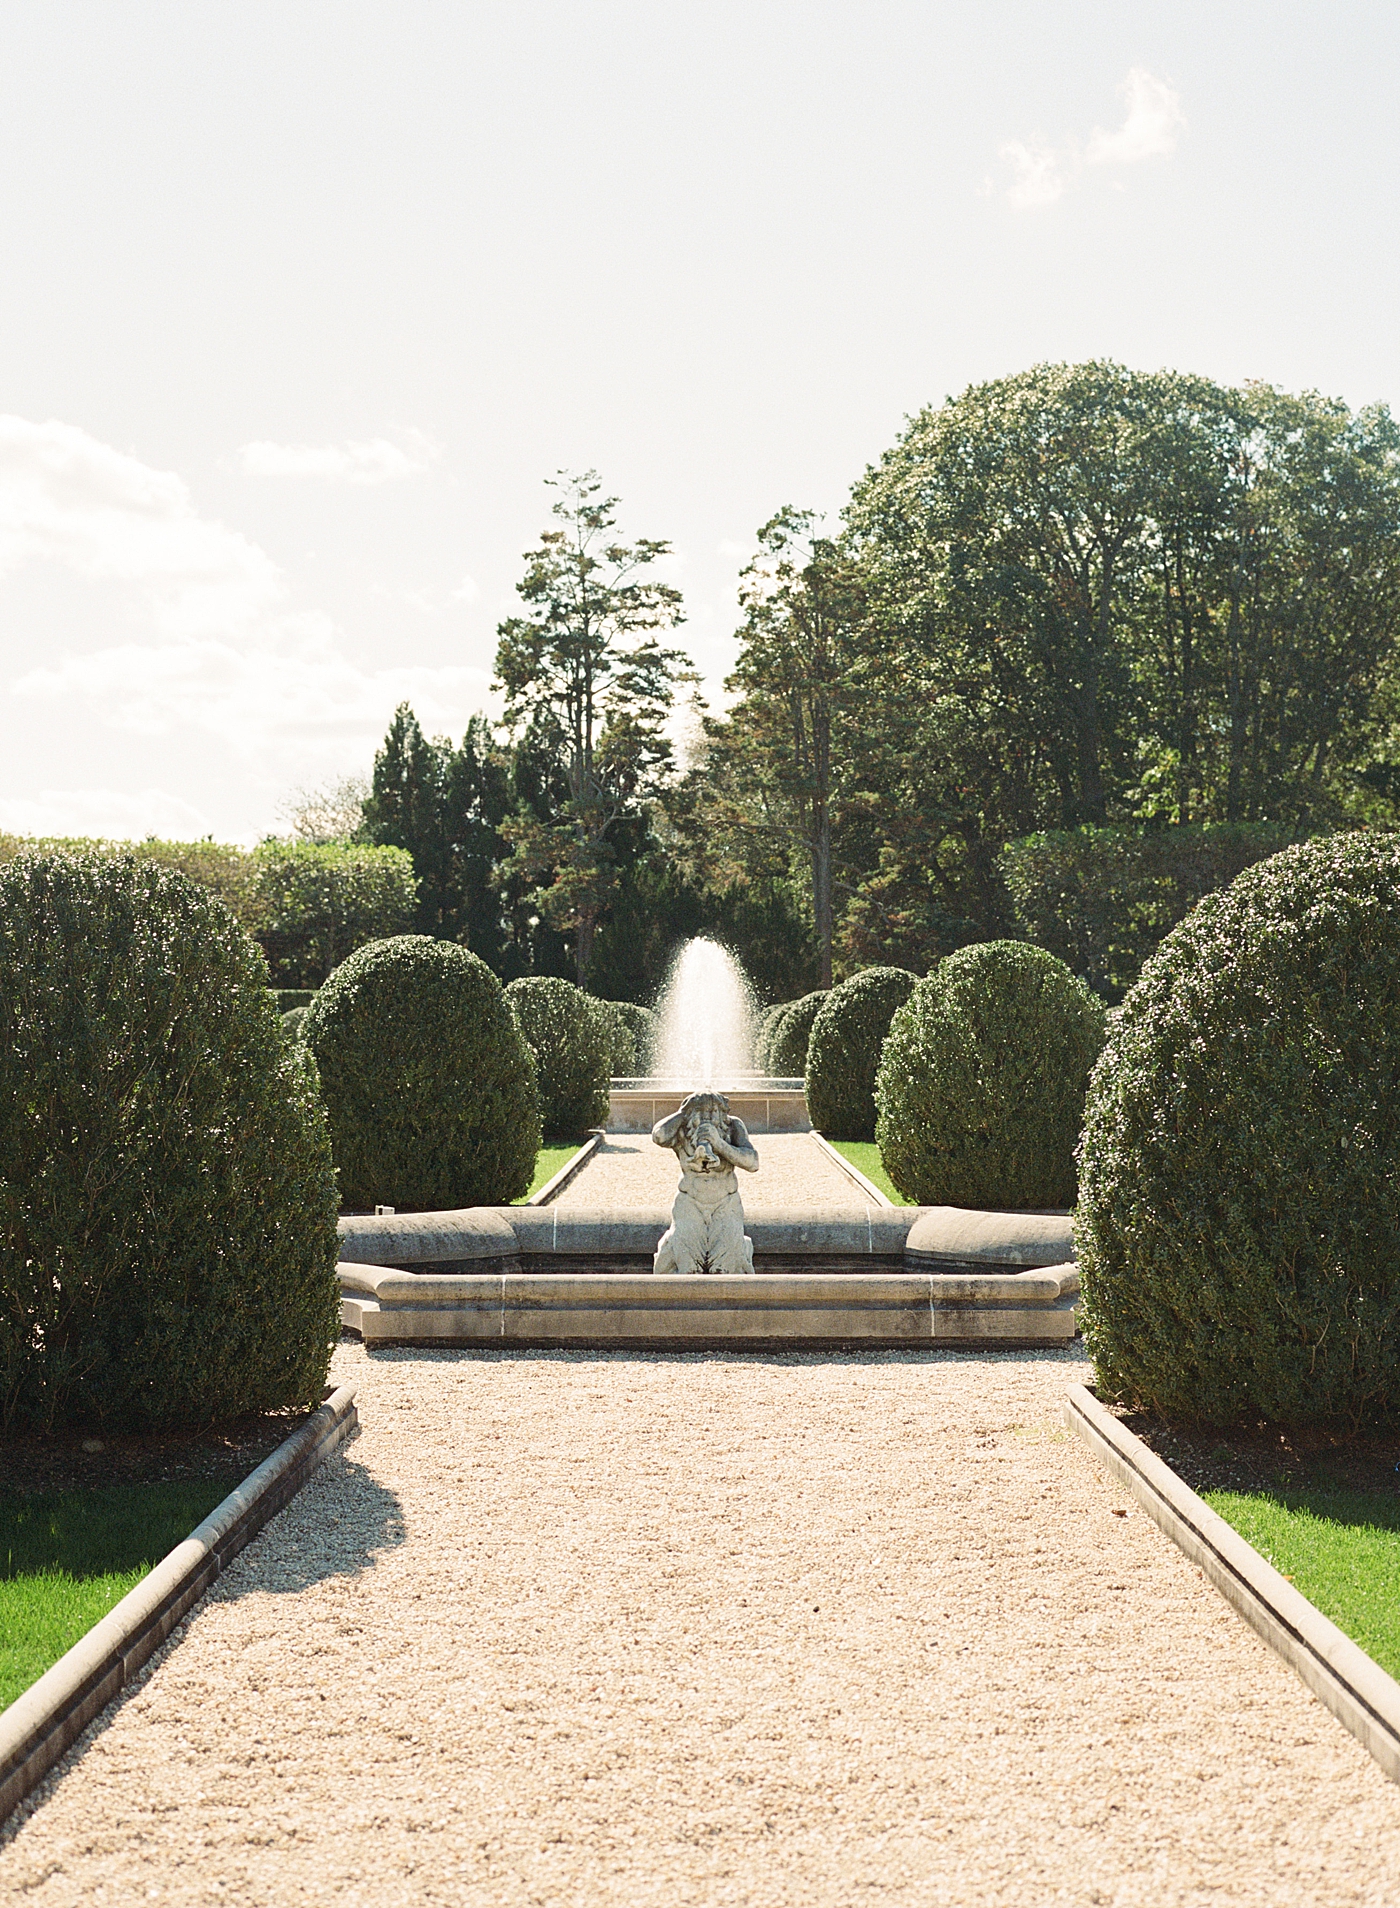 Image of a European garden with hedges, statues, and fountains | Image by Hope Helmuth Photography